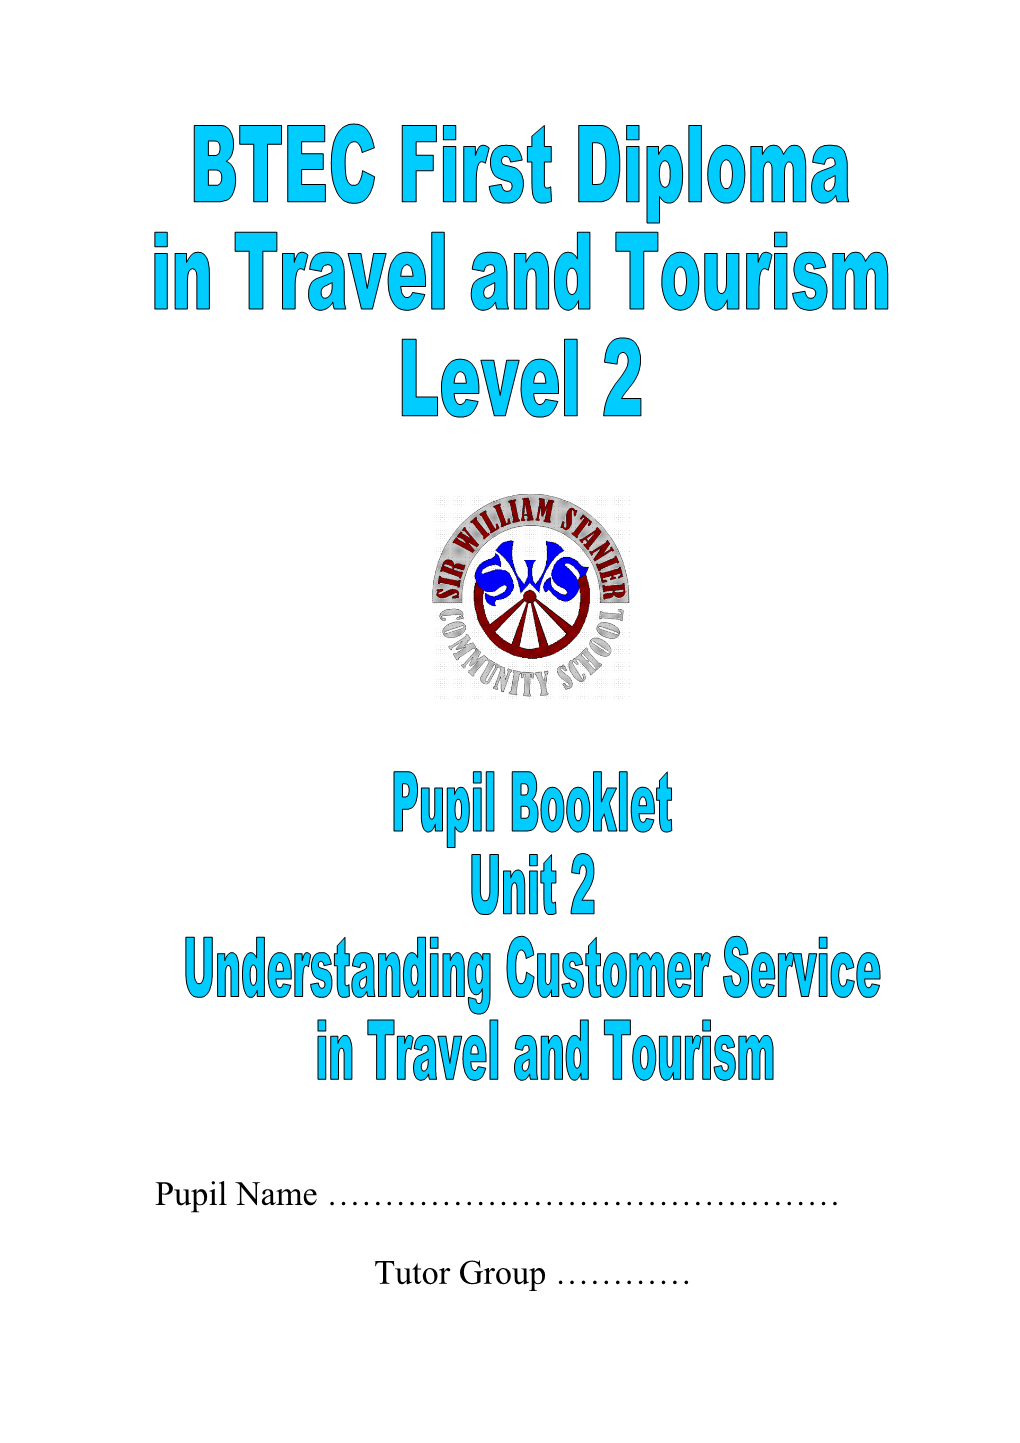 BTEC First Diploma in Travel and Tourism Task